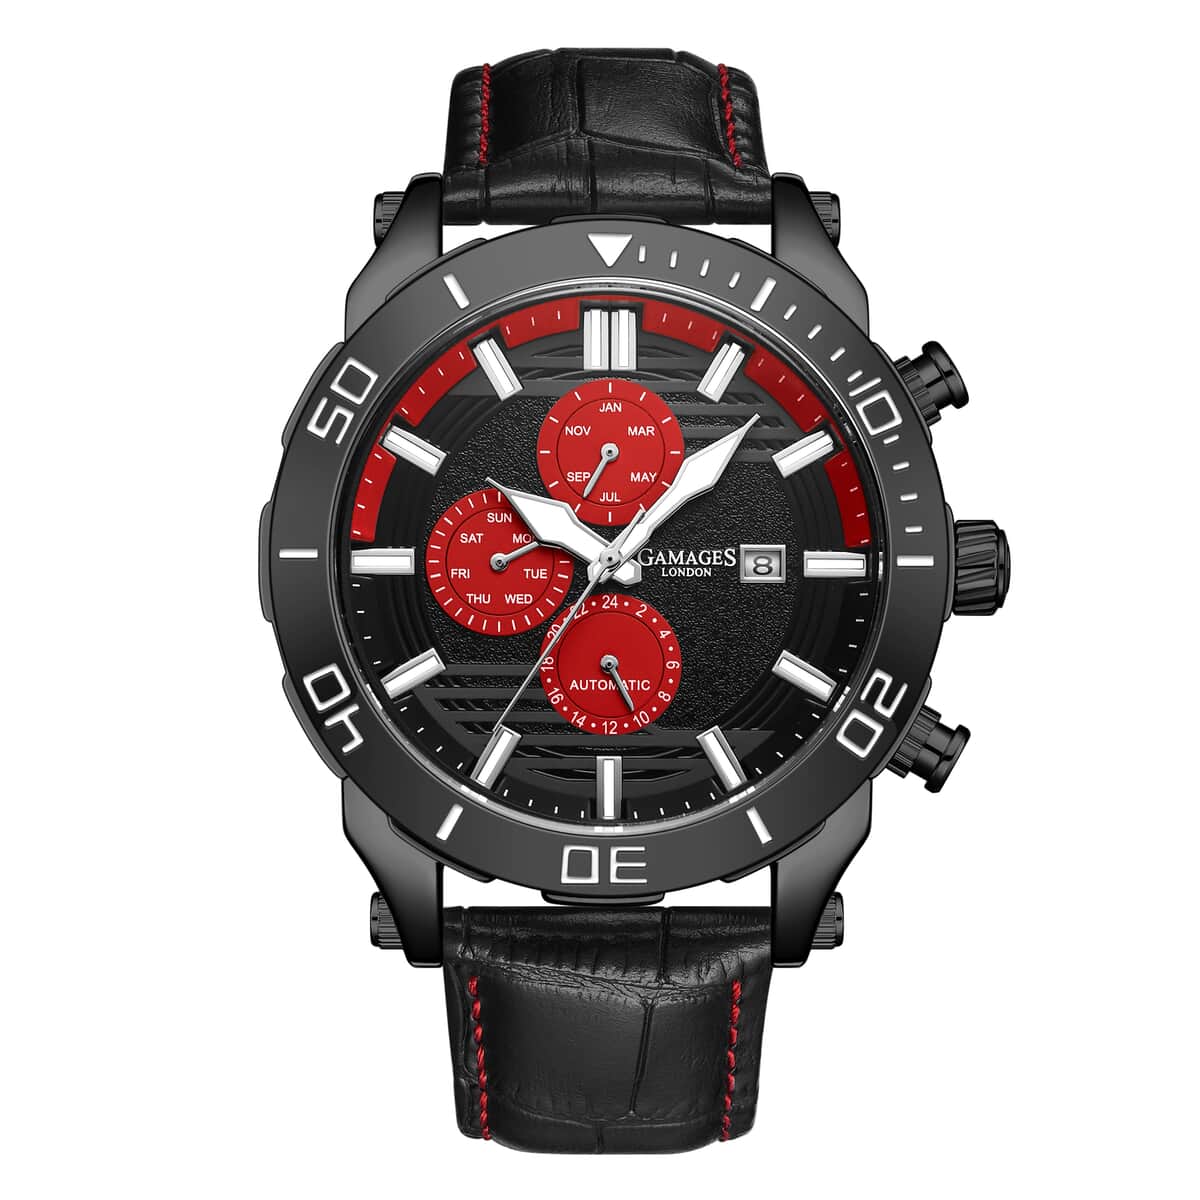 Gamages of London Limited Edition Hand Assembled Velocity Racer Automatic Movement Leather Strap Watch in Black ION Plating (45mm) with FREE GIFT PEN image number 0